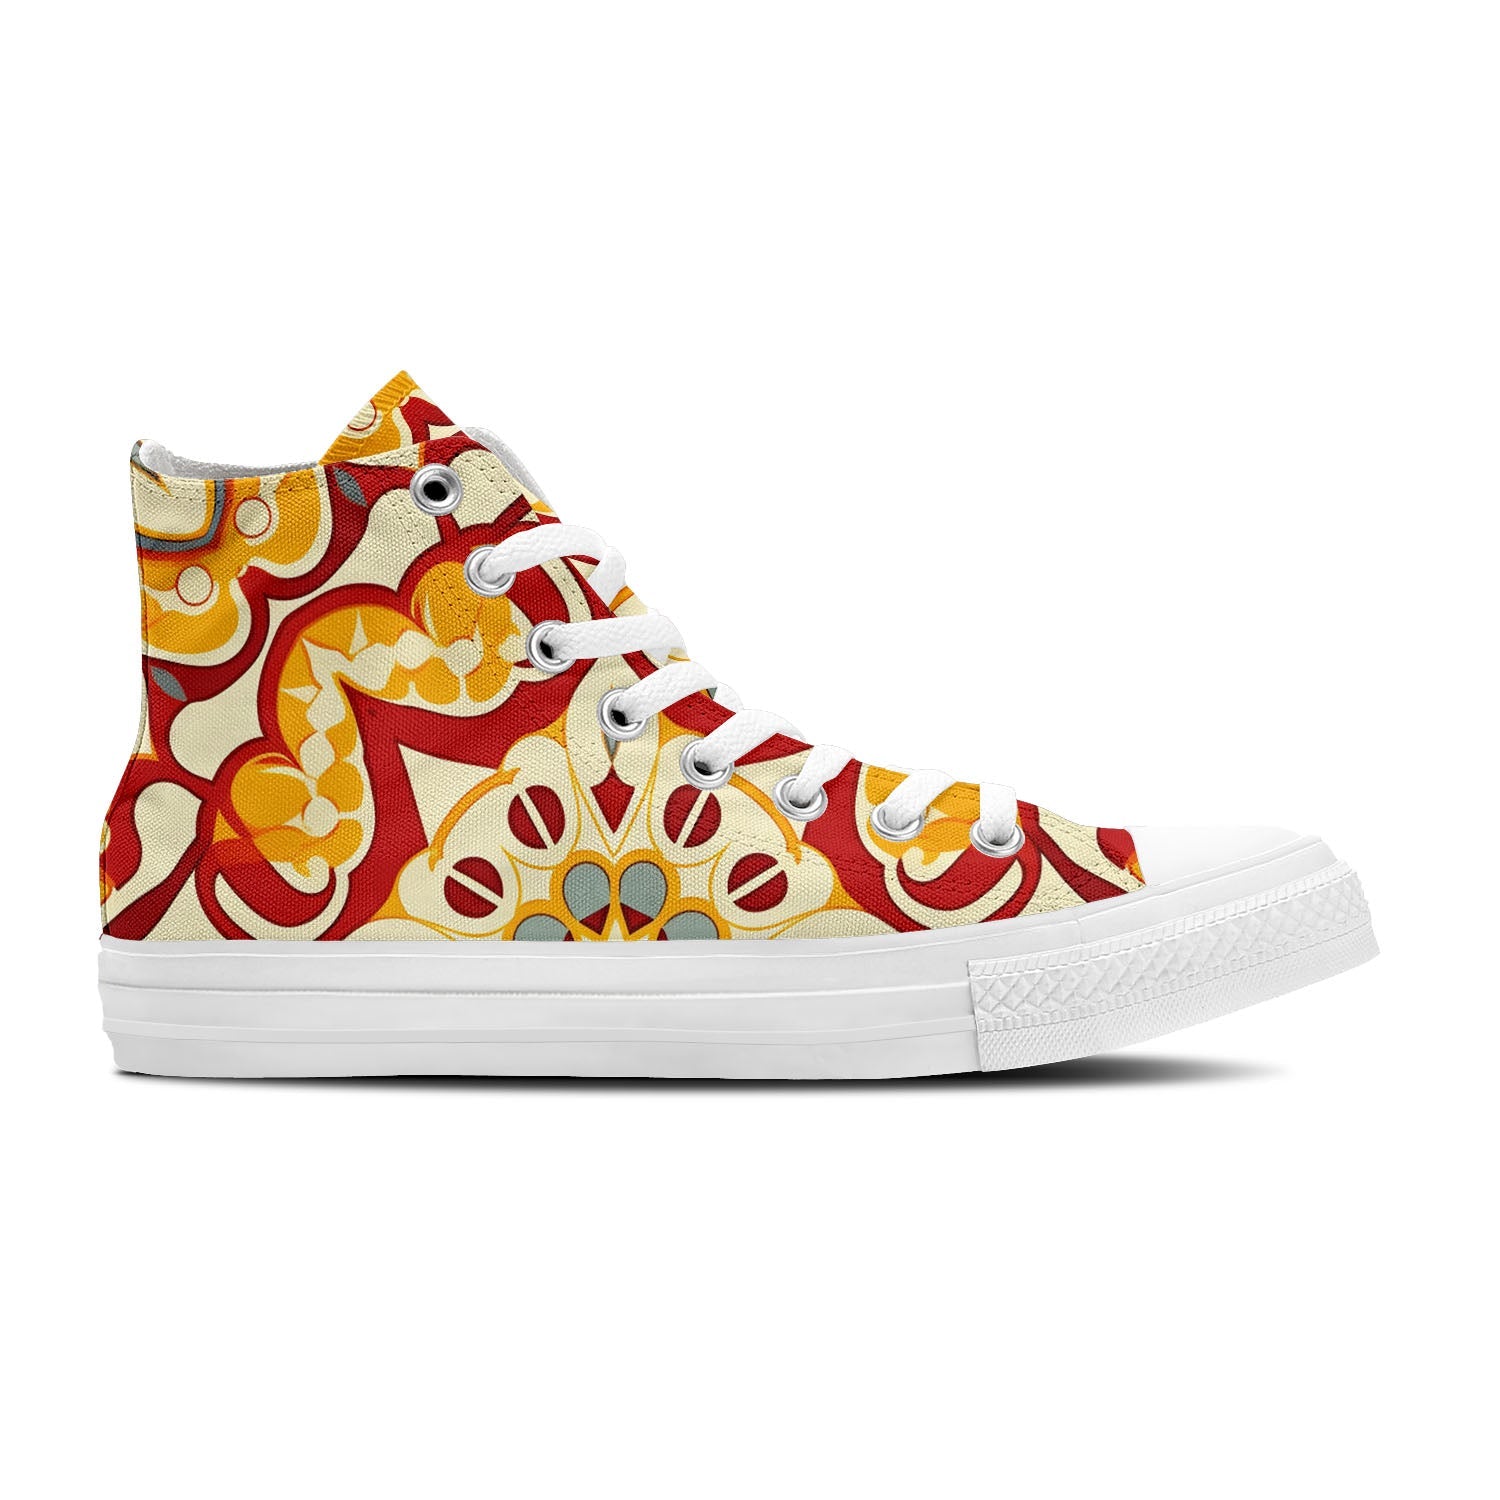 Walk the streets in unparalleled style with our Mid-Cut Canvas Shoes, featuring intricate Moroccan-inspired patterns in a vibrant palette of reds, yellows, and greens